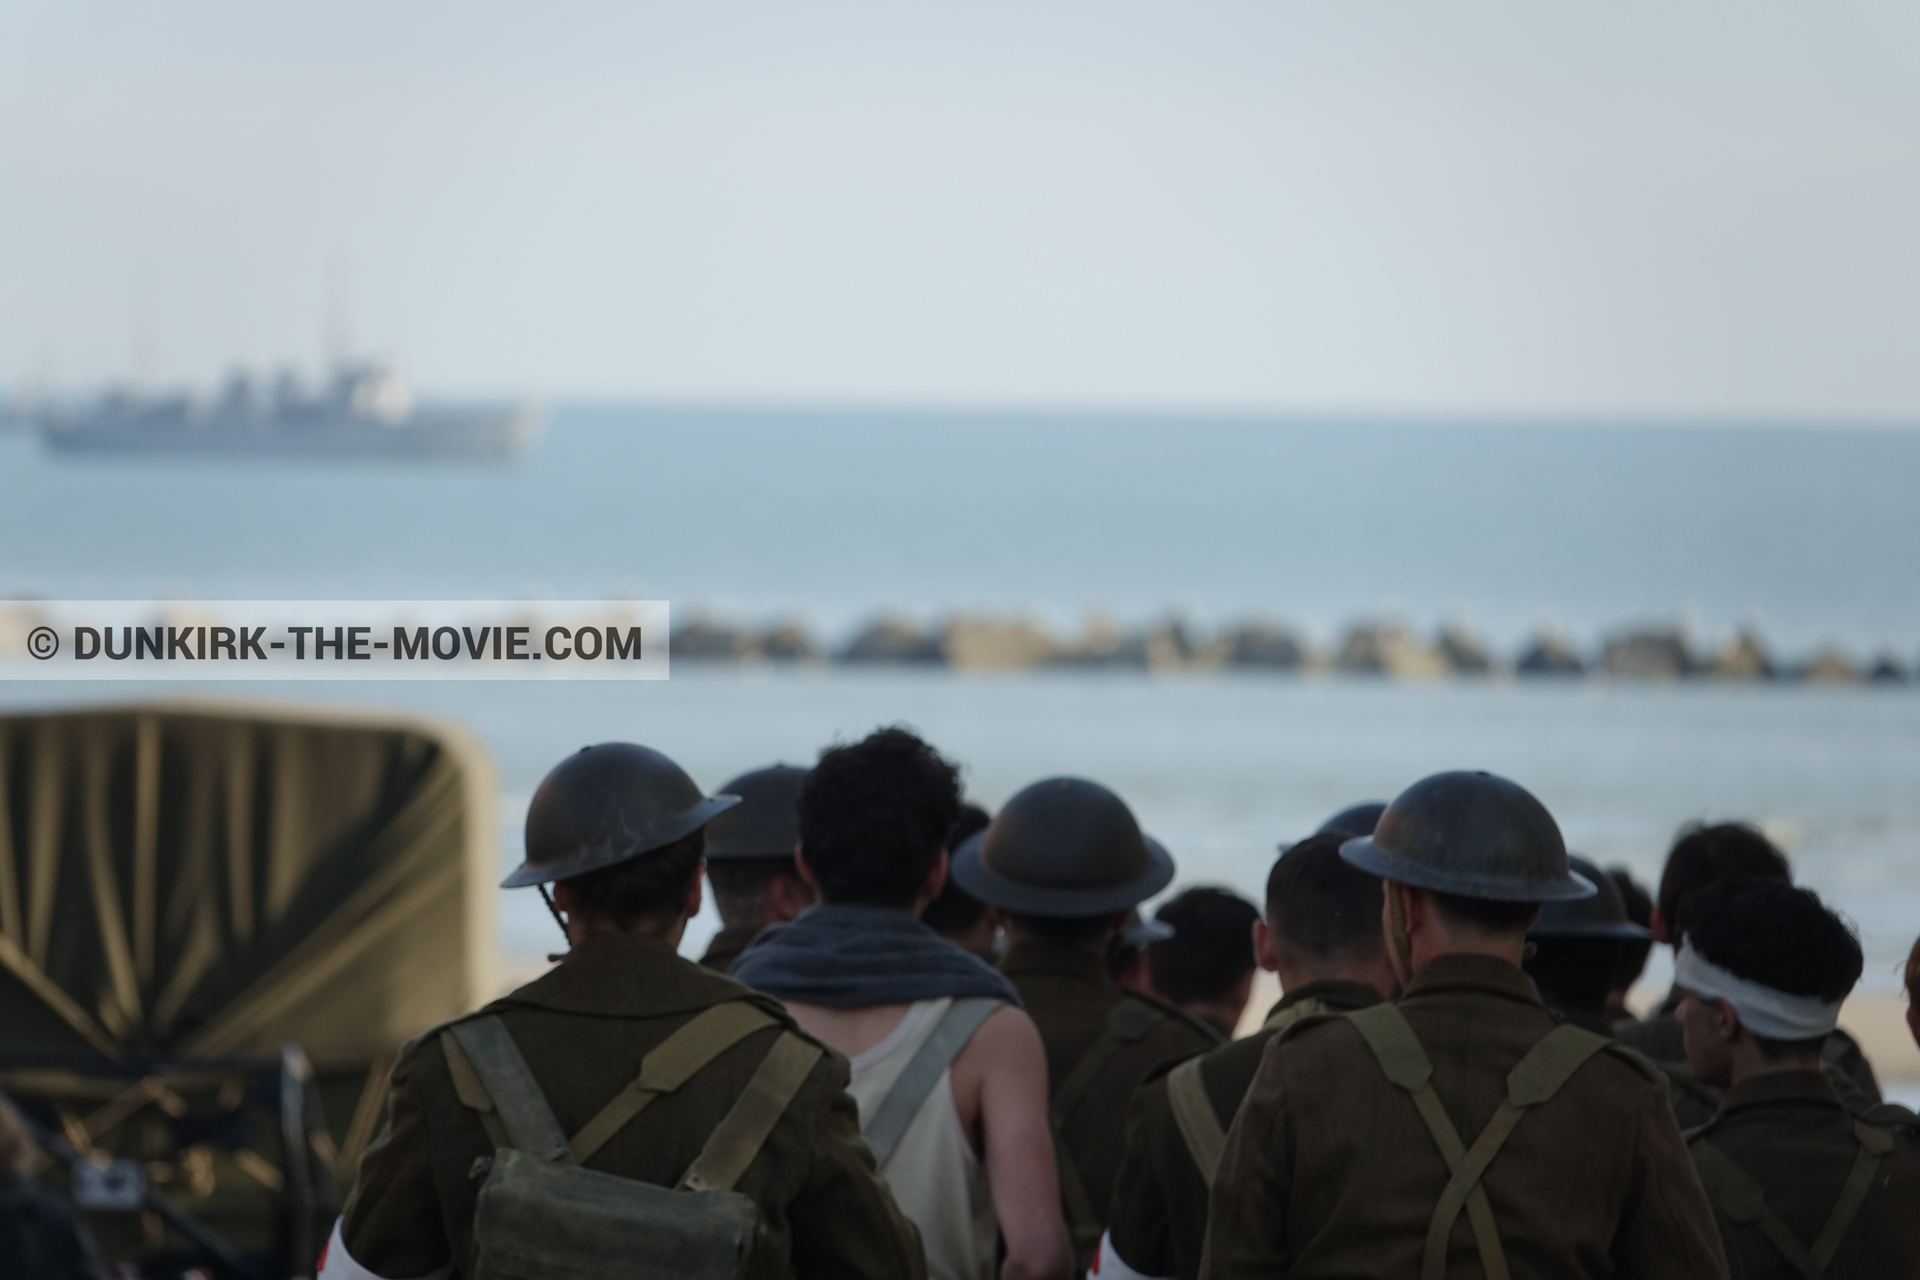 Picture with boat, truck, supernumeraries,  from behind the scene of the Dunkirk movie by Nolan